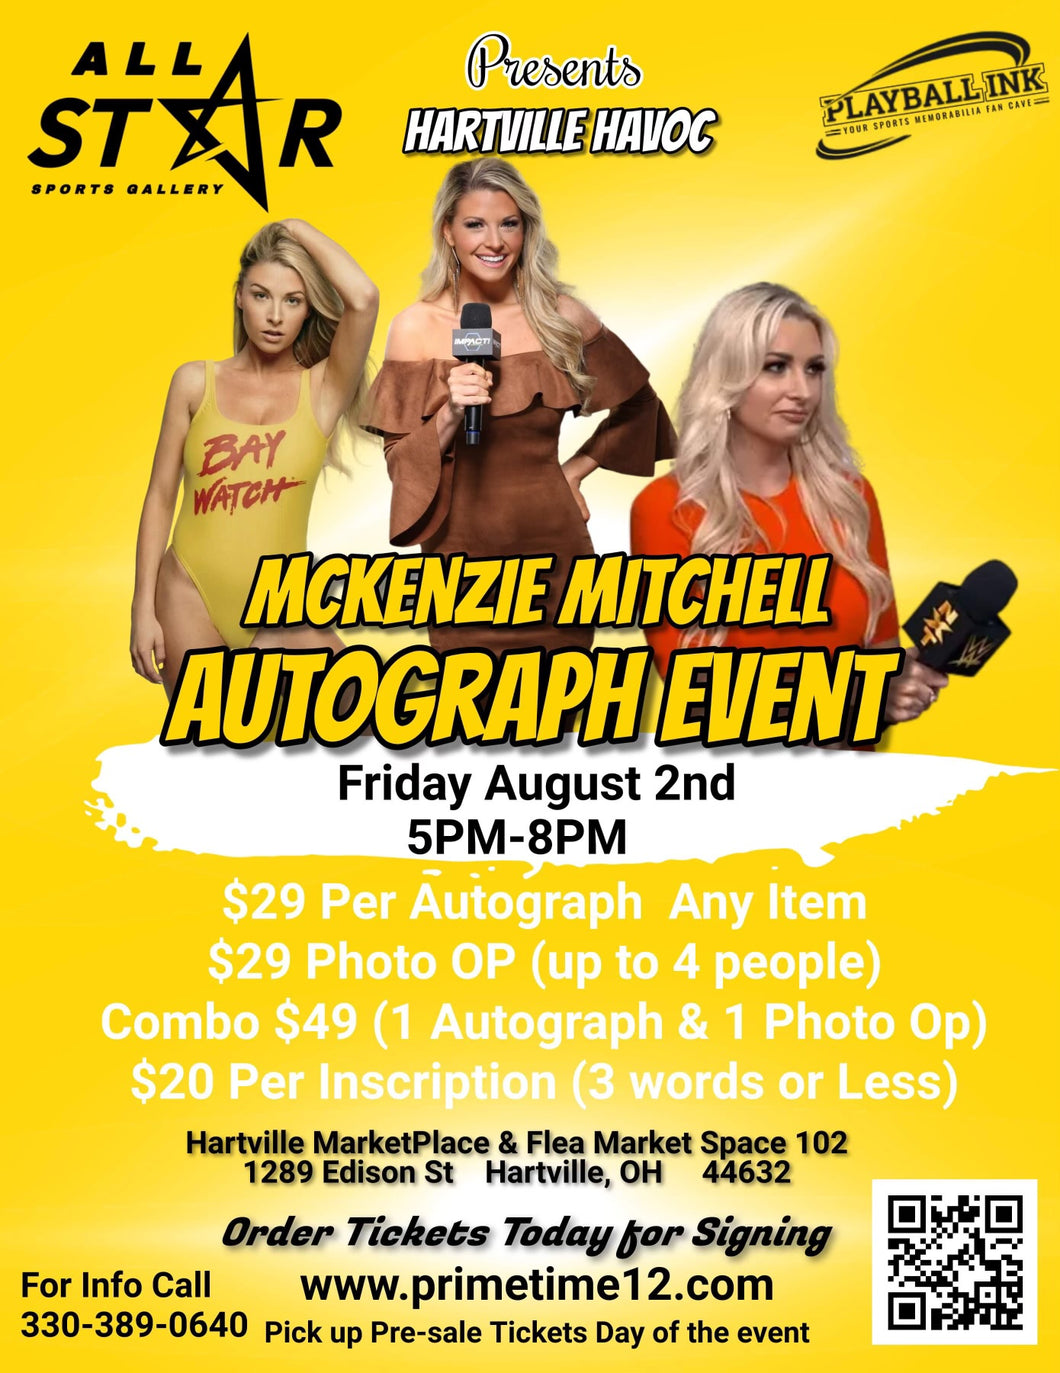 McKenzie Mitchell (Former NXT Interviewer) Pre-Sale for PHOTO OP ticket to have your photo taken with her